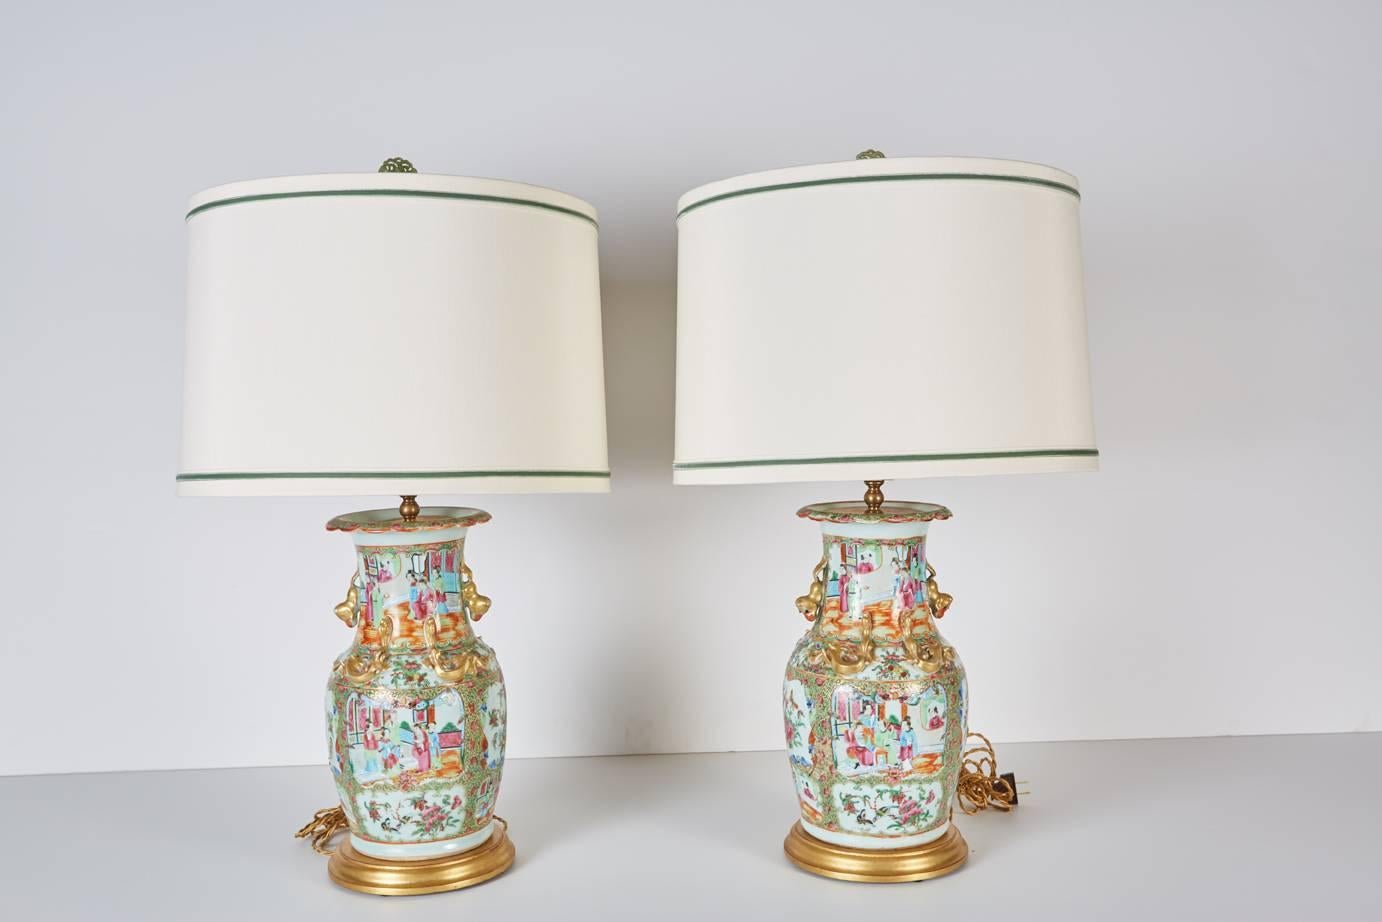 Pair of Fine Chinese export vases in the rose mandarin pattern newly mounted as lamps on custom giltwood bases with custom silk shades trimmed in green velvet ribbon.